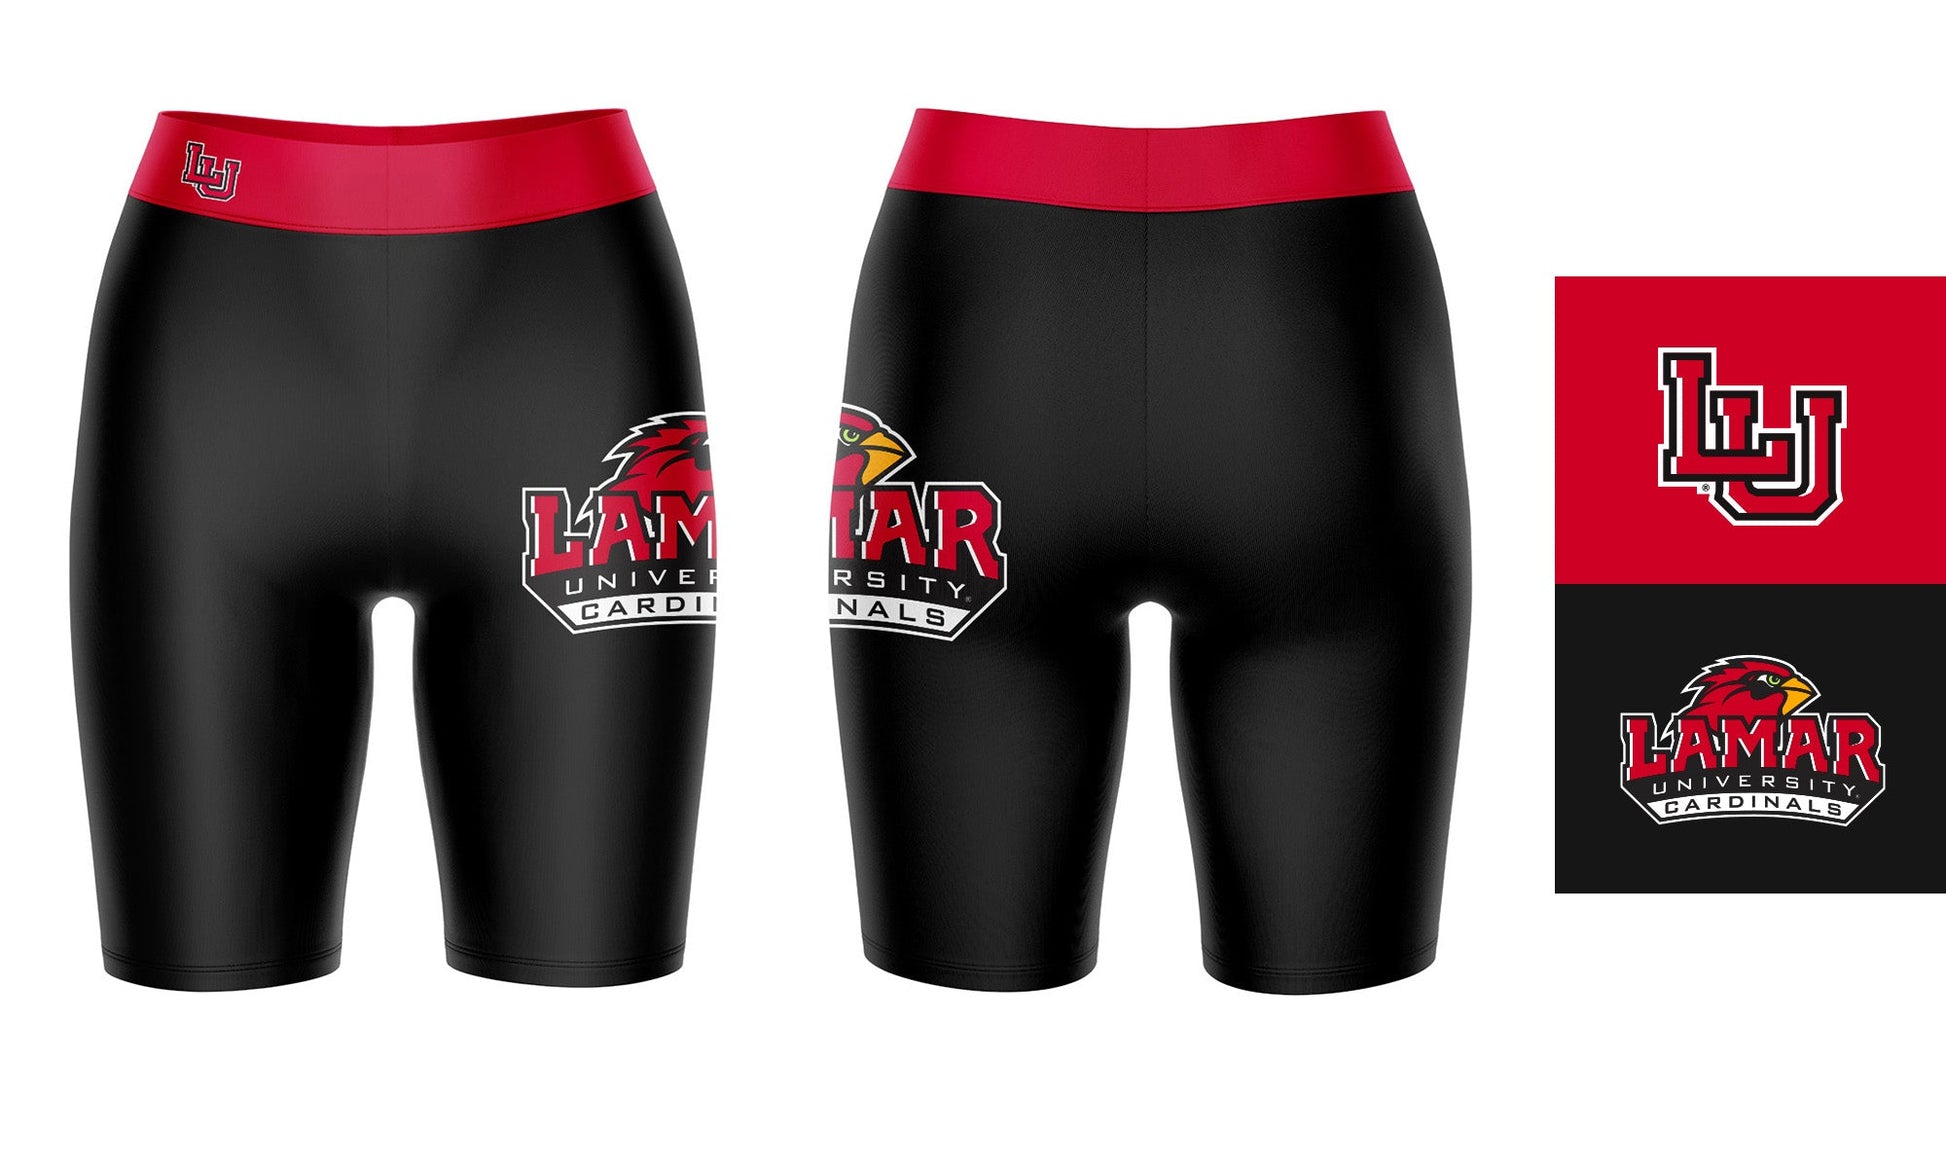 Lamar Cardinals Vive La Fete Game Day Logo on Thigh and Waistband Black and Red Women Bike Short 9 Inseam"